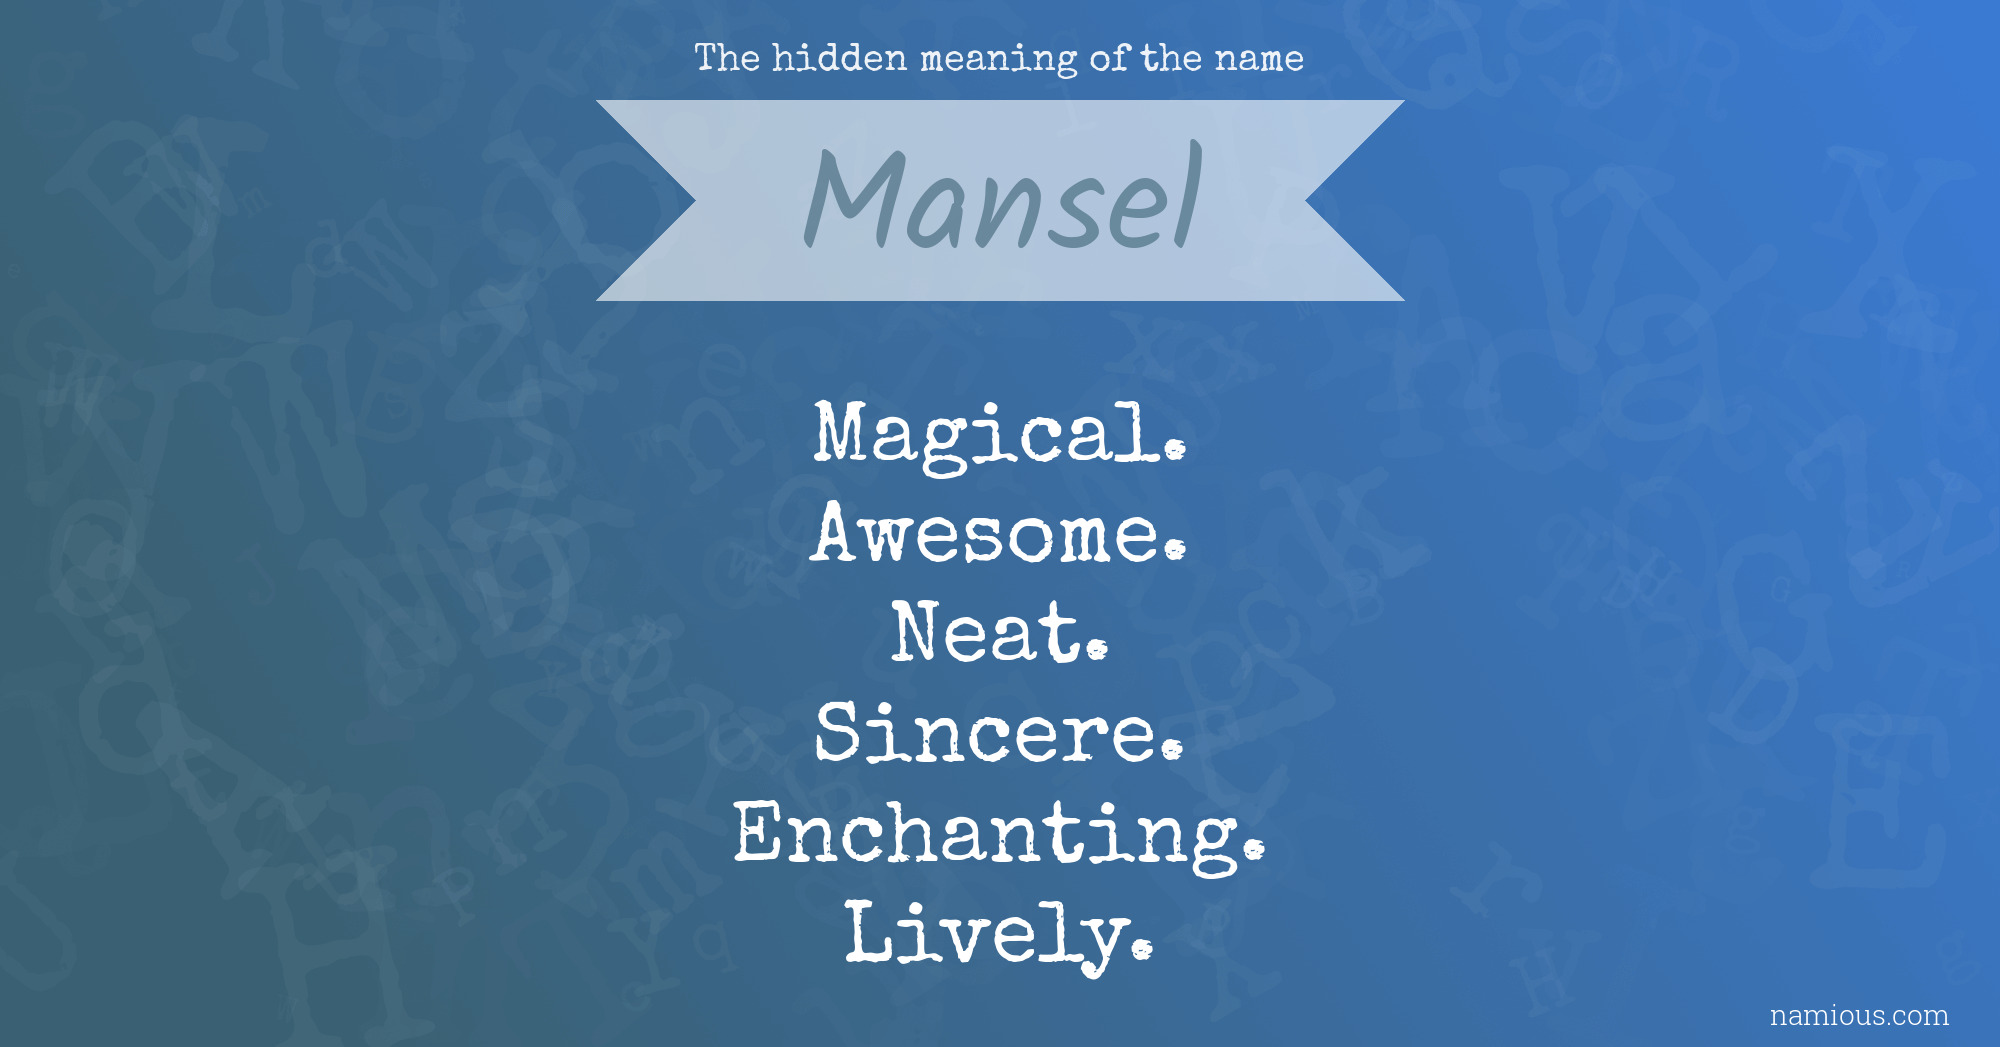 The hidden meaning of the name Mansel